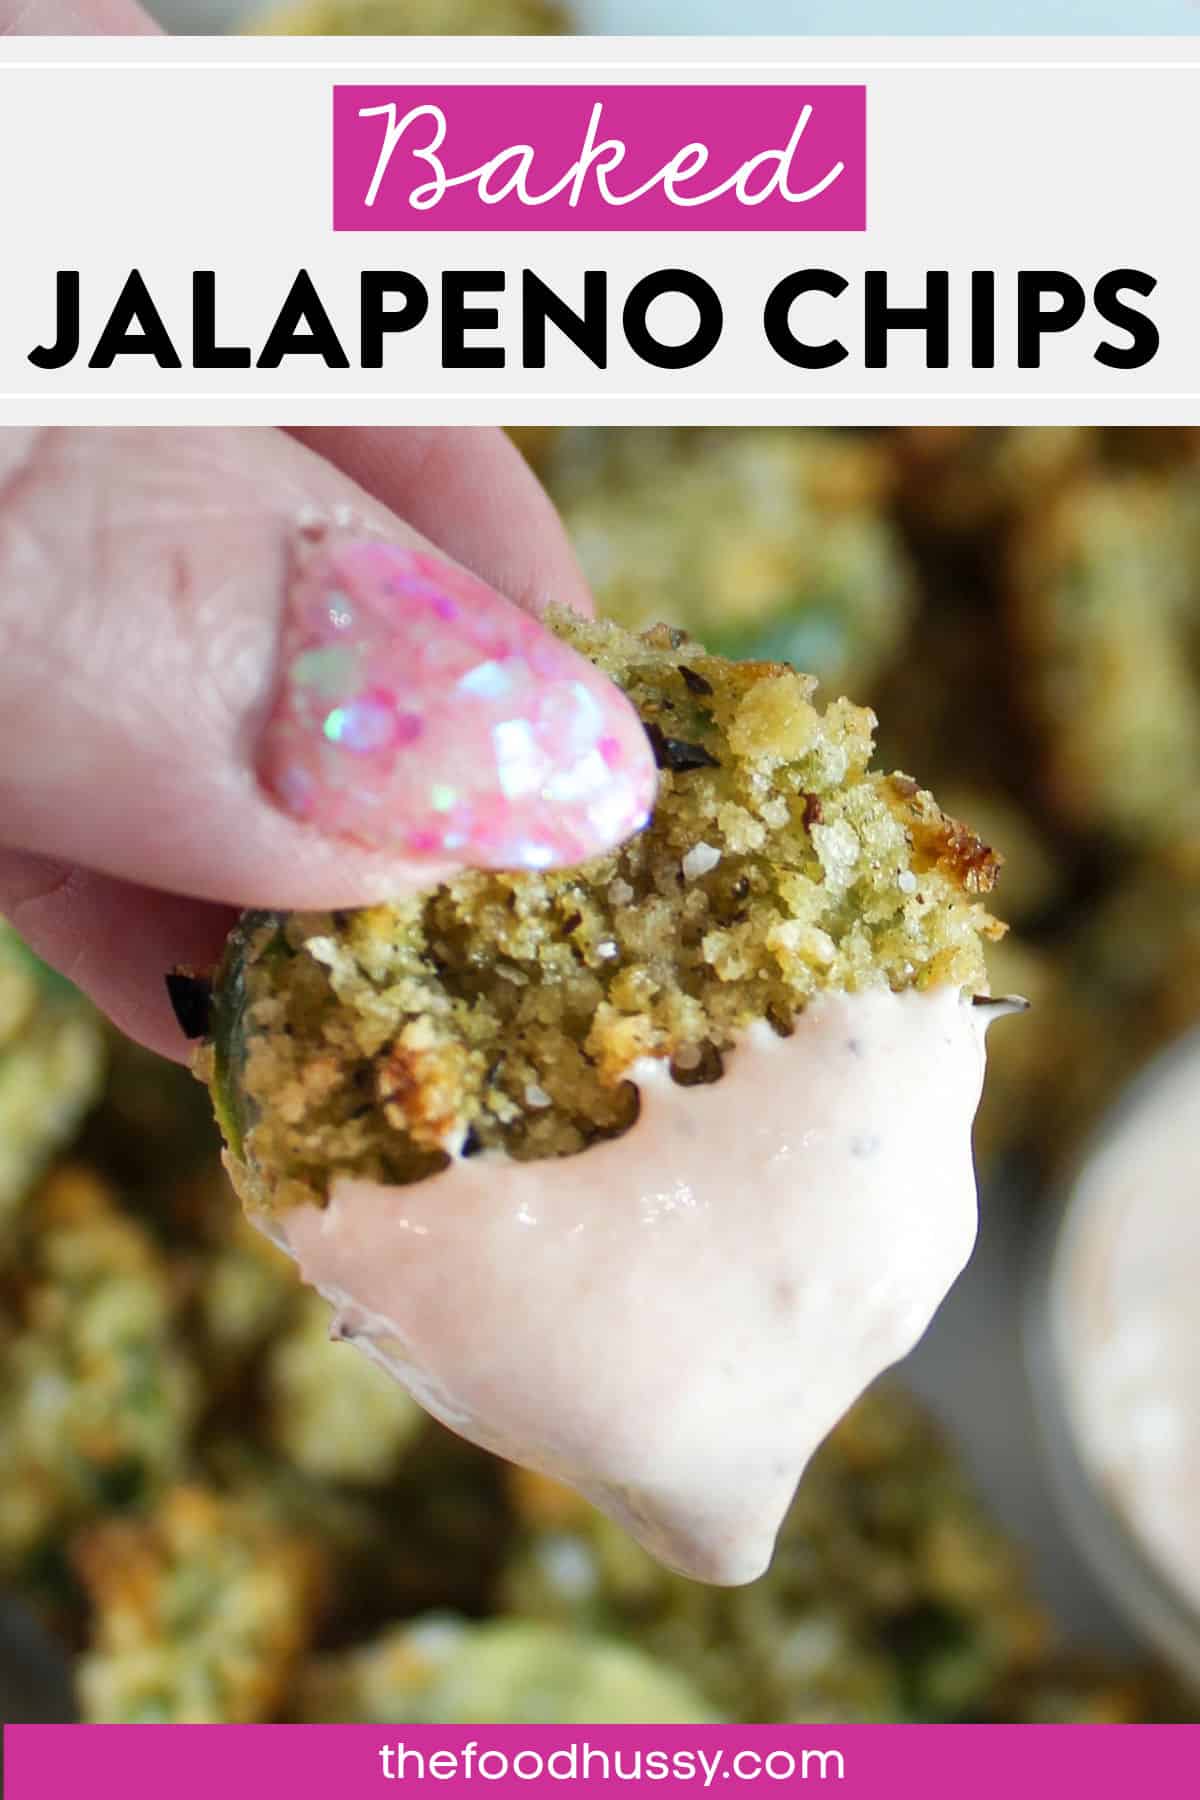 Baked Jalapeno Chips are crunchy little bites of yum that have a touch of spice and are perfect for dipping! Whether you're having them as a side dish, as a Taco Tuesday appetizer or just a dipping snack - you'll be asking for more! via @foodhussy